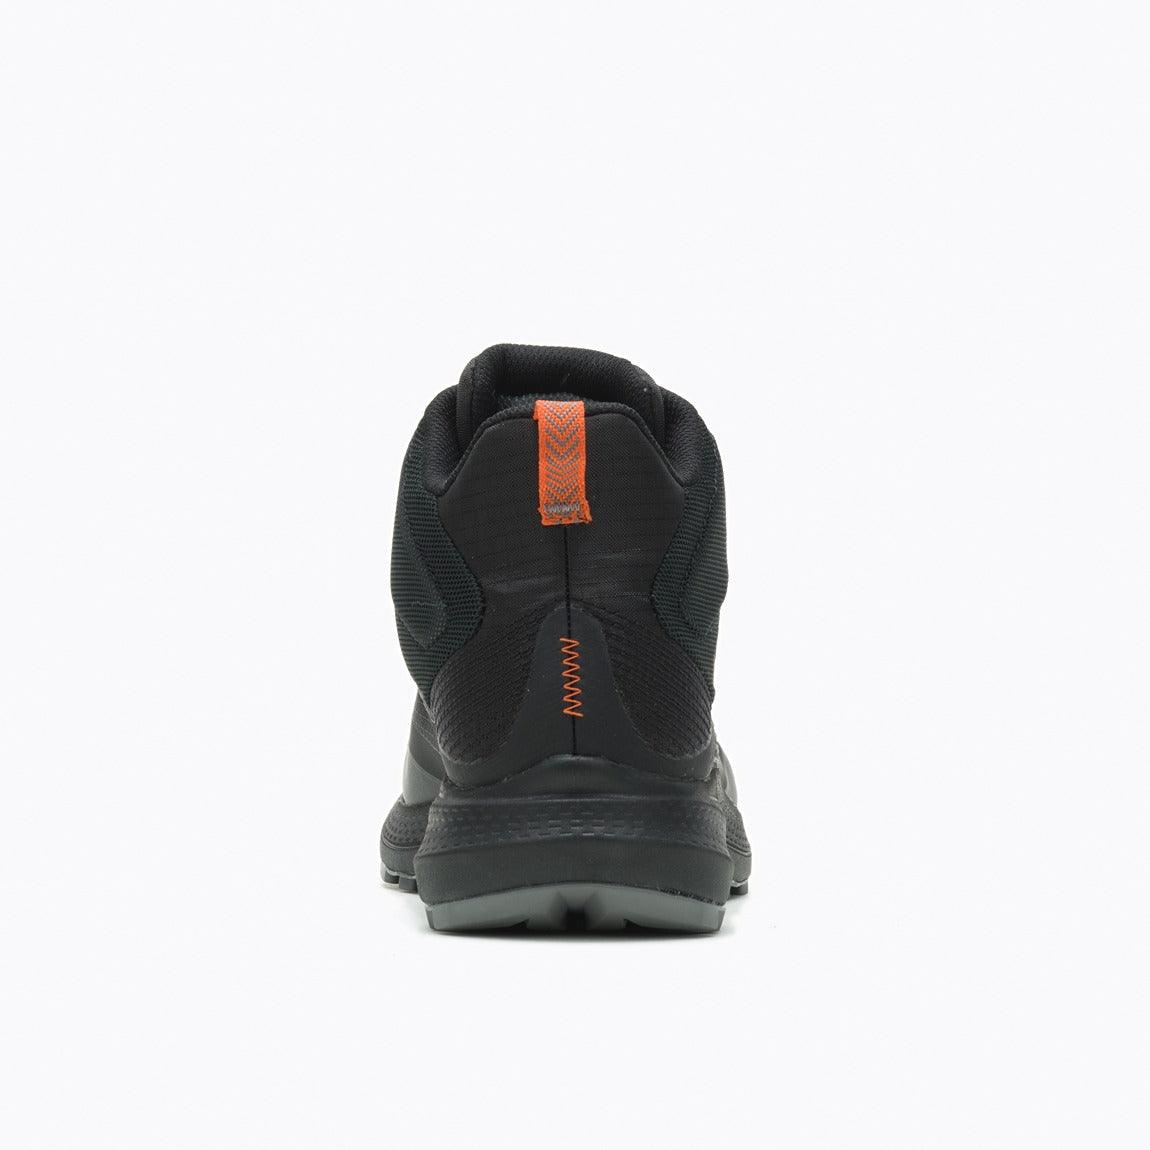 MQM 3 Mid GORE-TEX® Hiking Shoes - Men - Sports Excellence